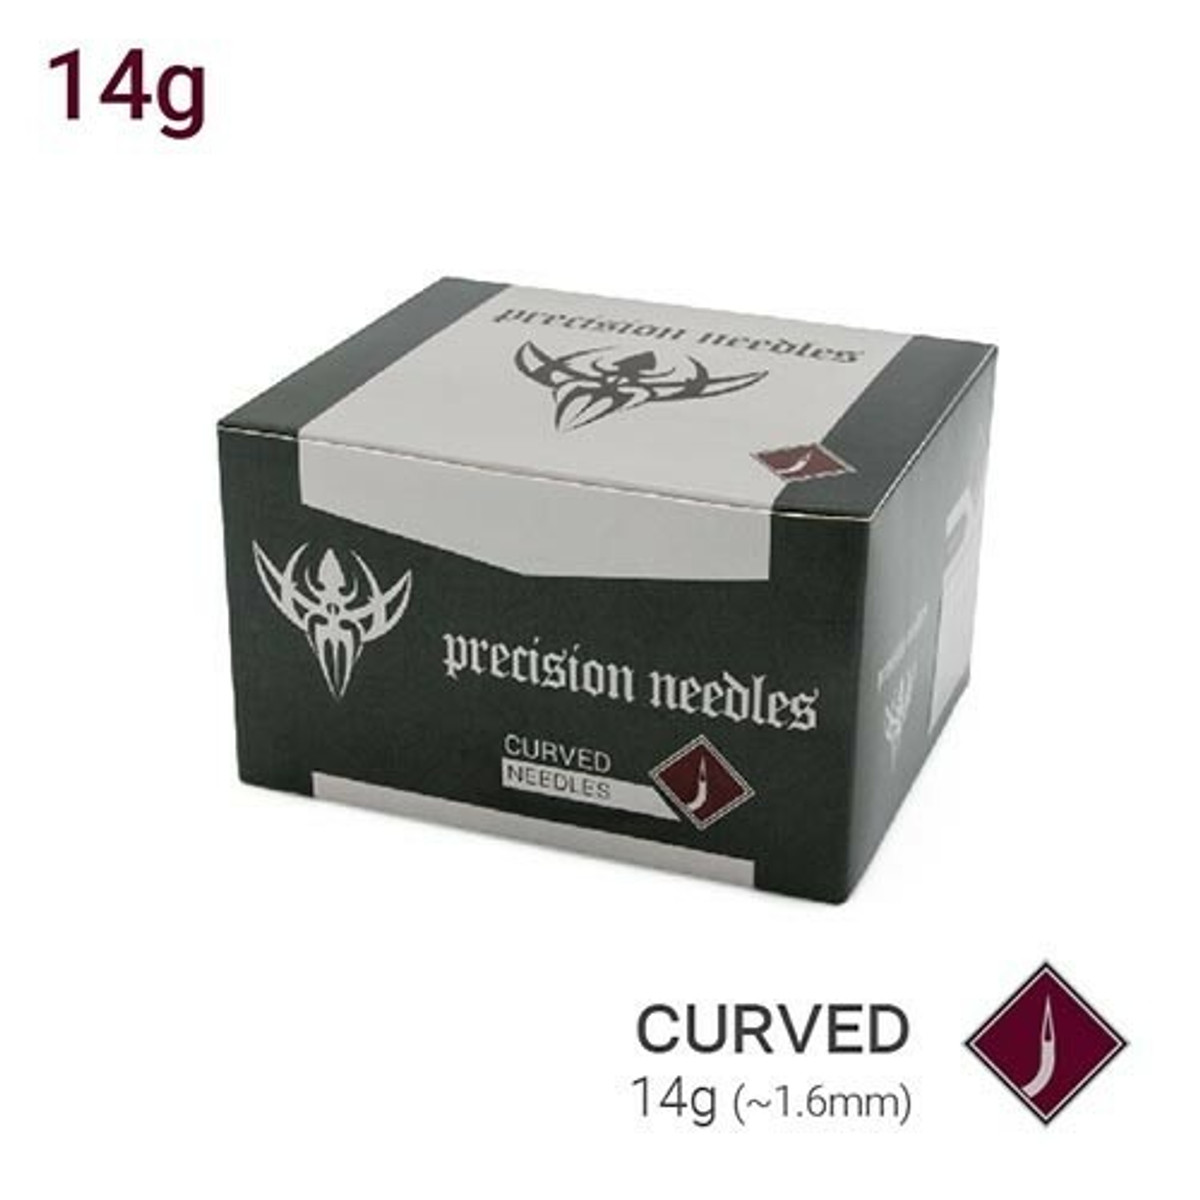 14g Curved Body Piercing Needles - Box of 50 Sterilized Precision Needles